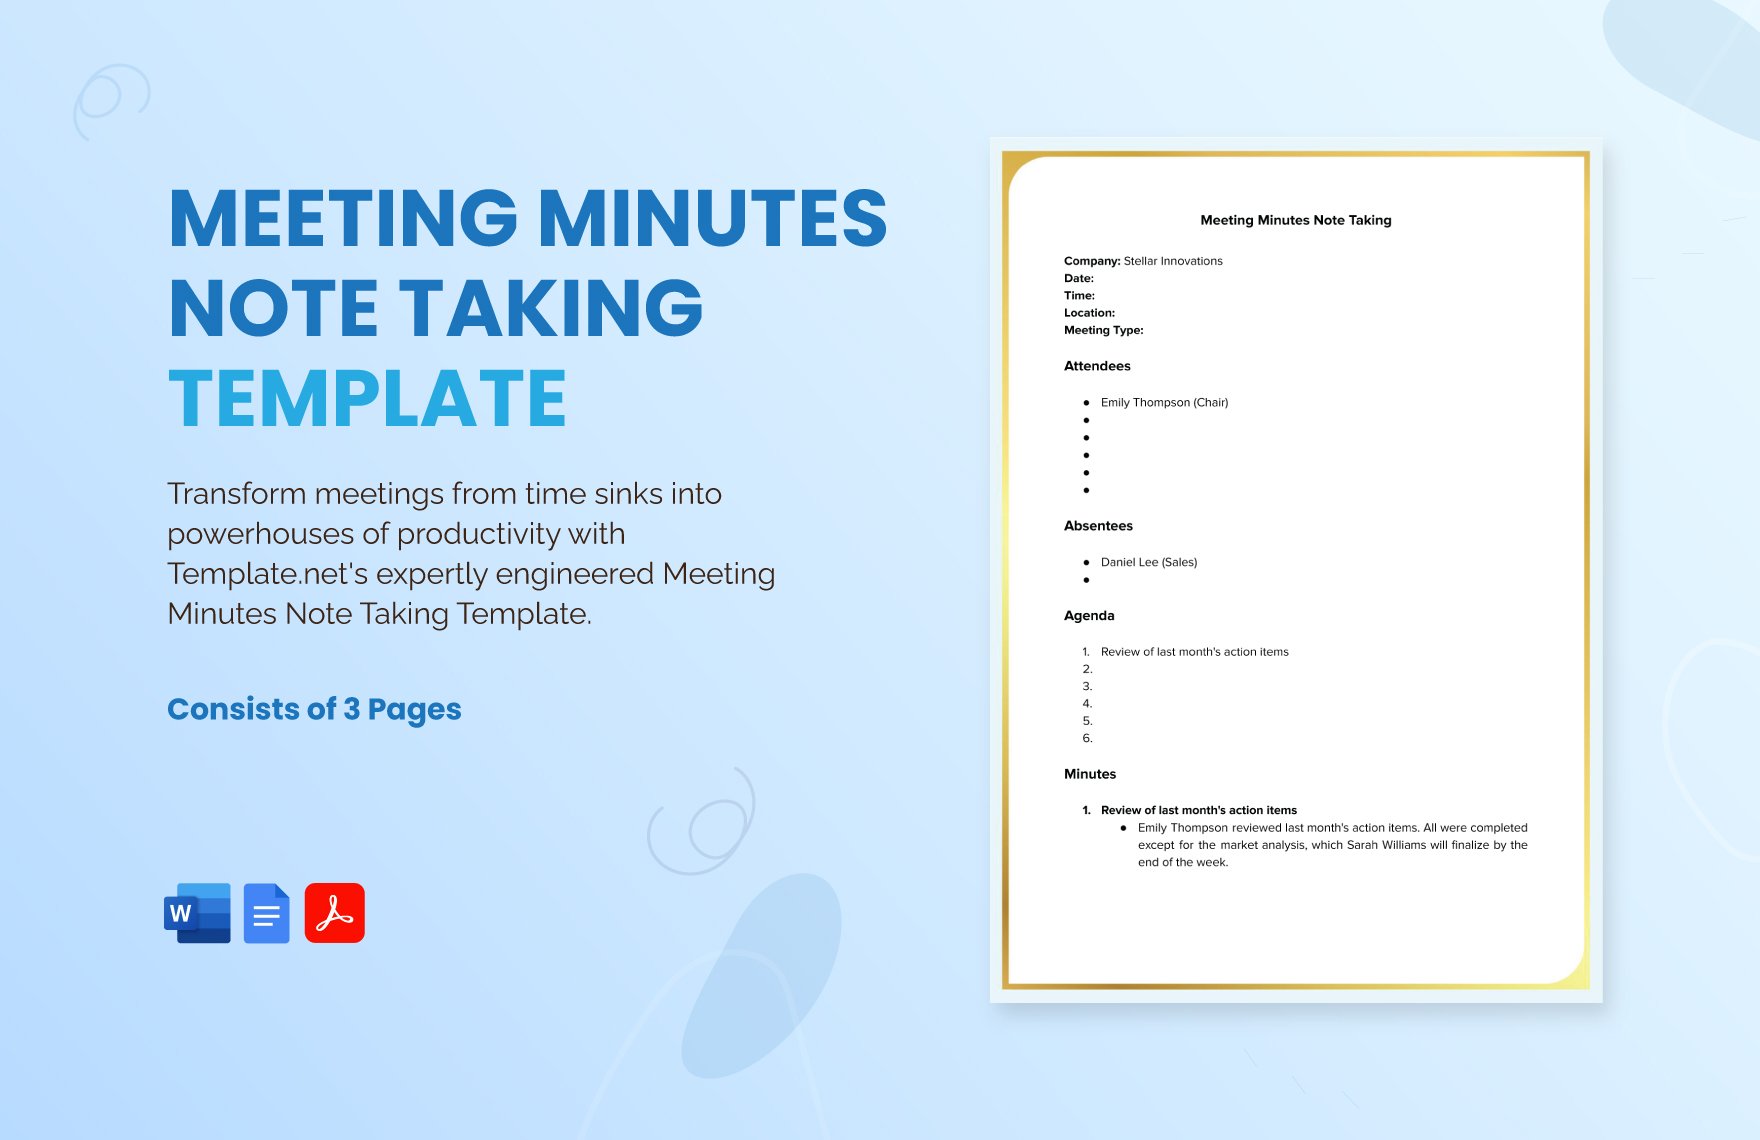 Meeting Minutes Note Taking Template 